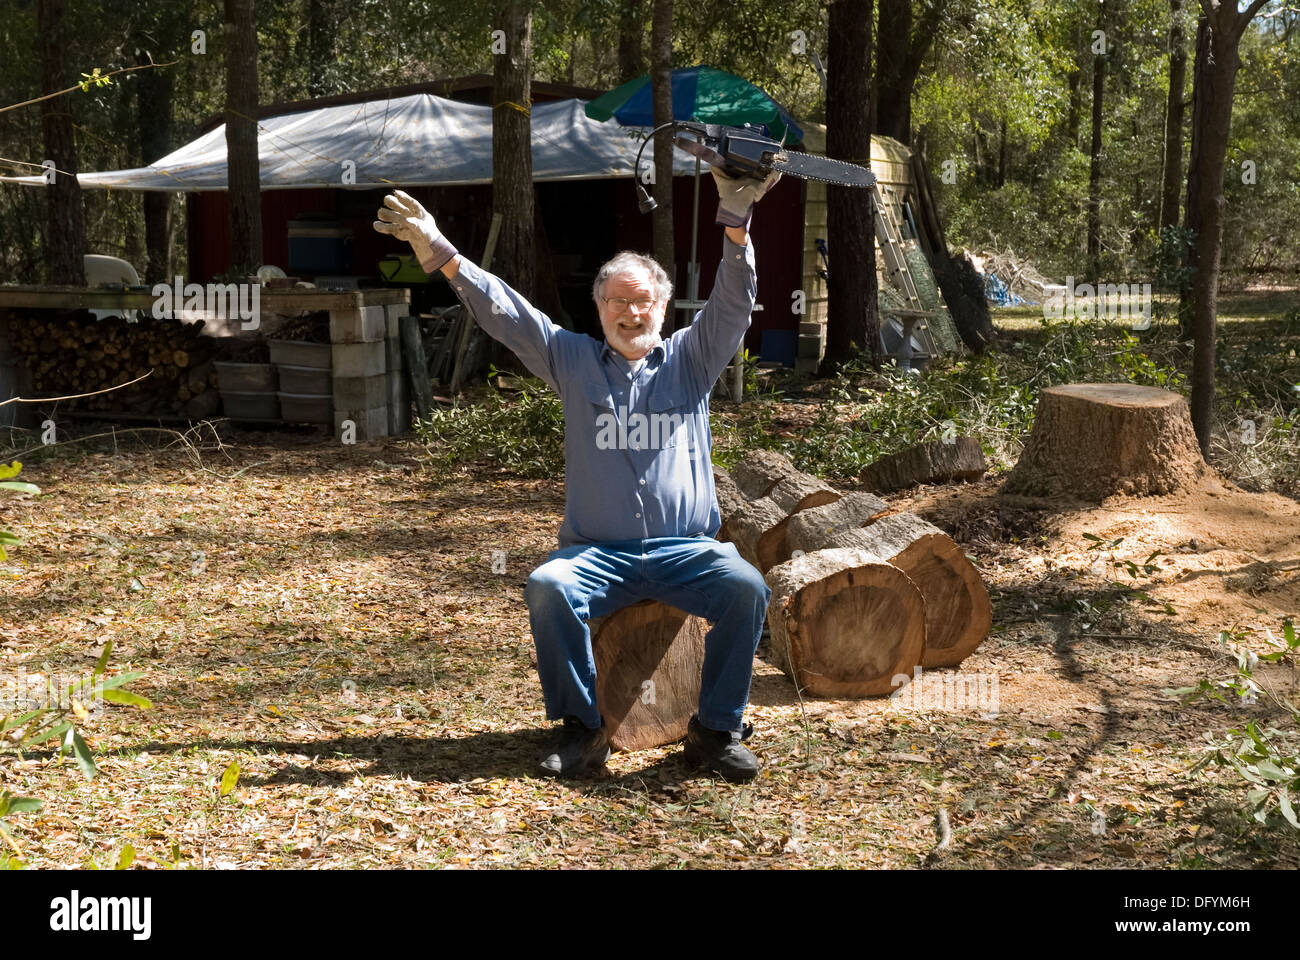 Man sitting on debris after success at cutting down a tree. Stock Photo